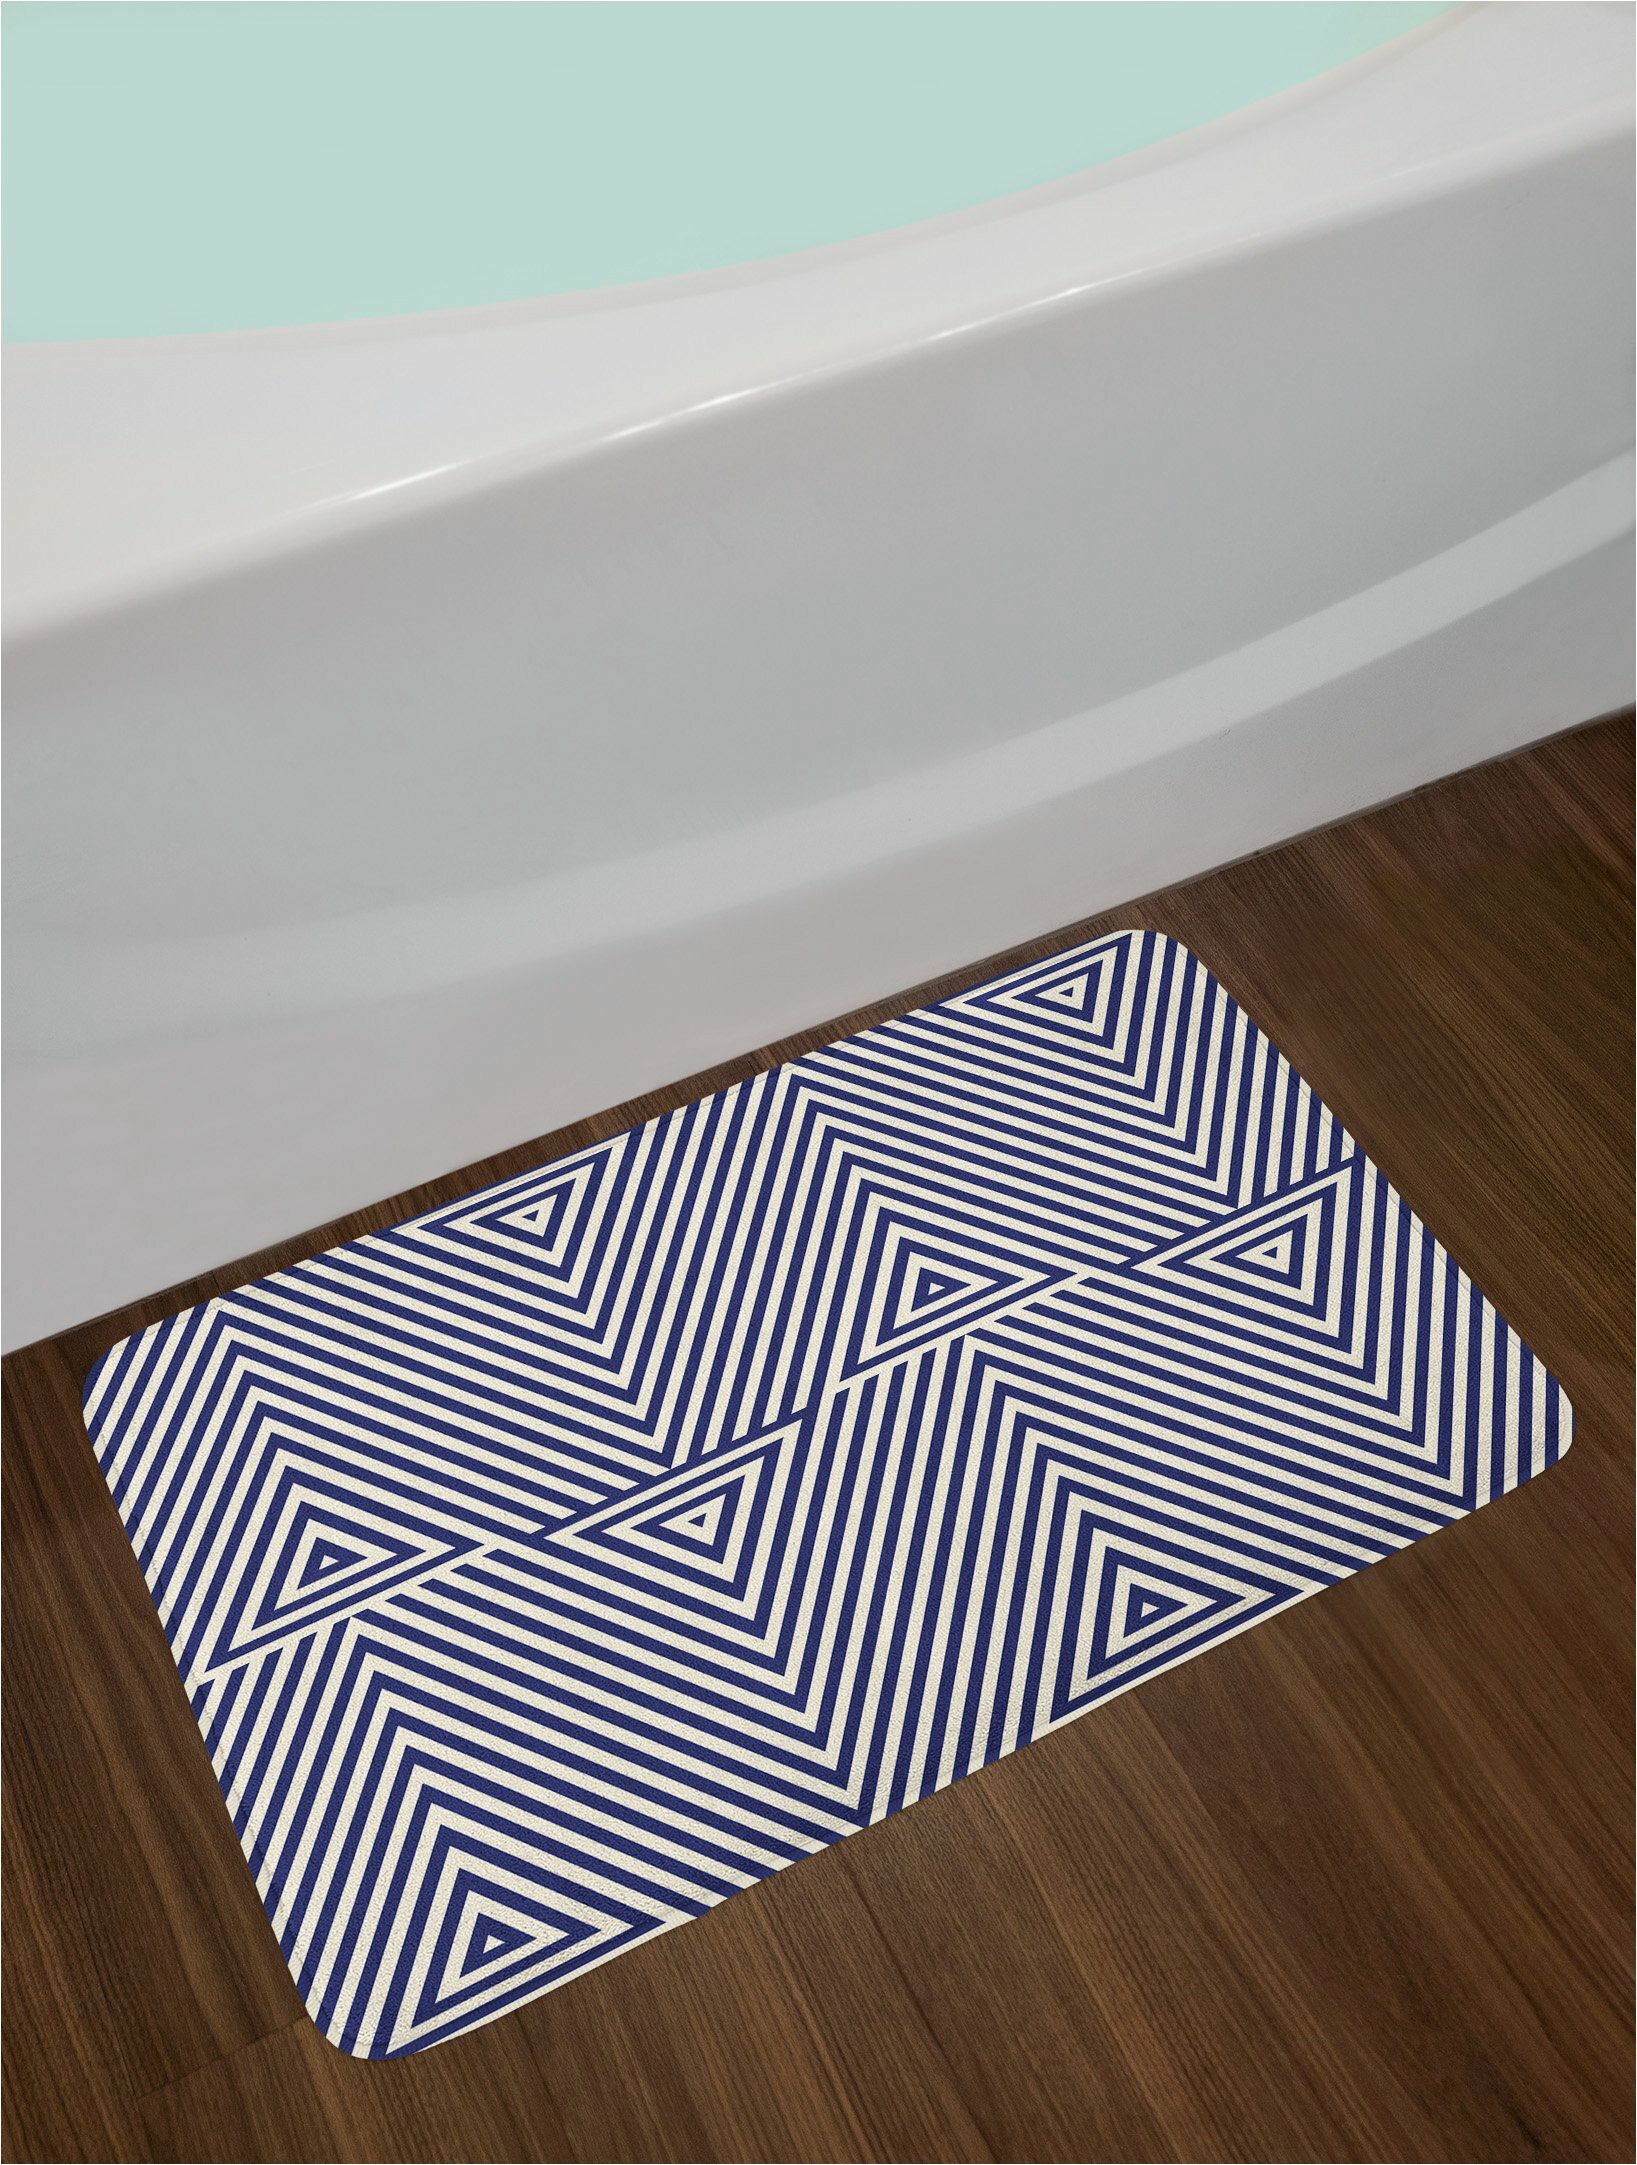 Navy Blue and White Bathroom Rugs Cool Dark Blue and White Navy Blue Bath Rug